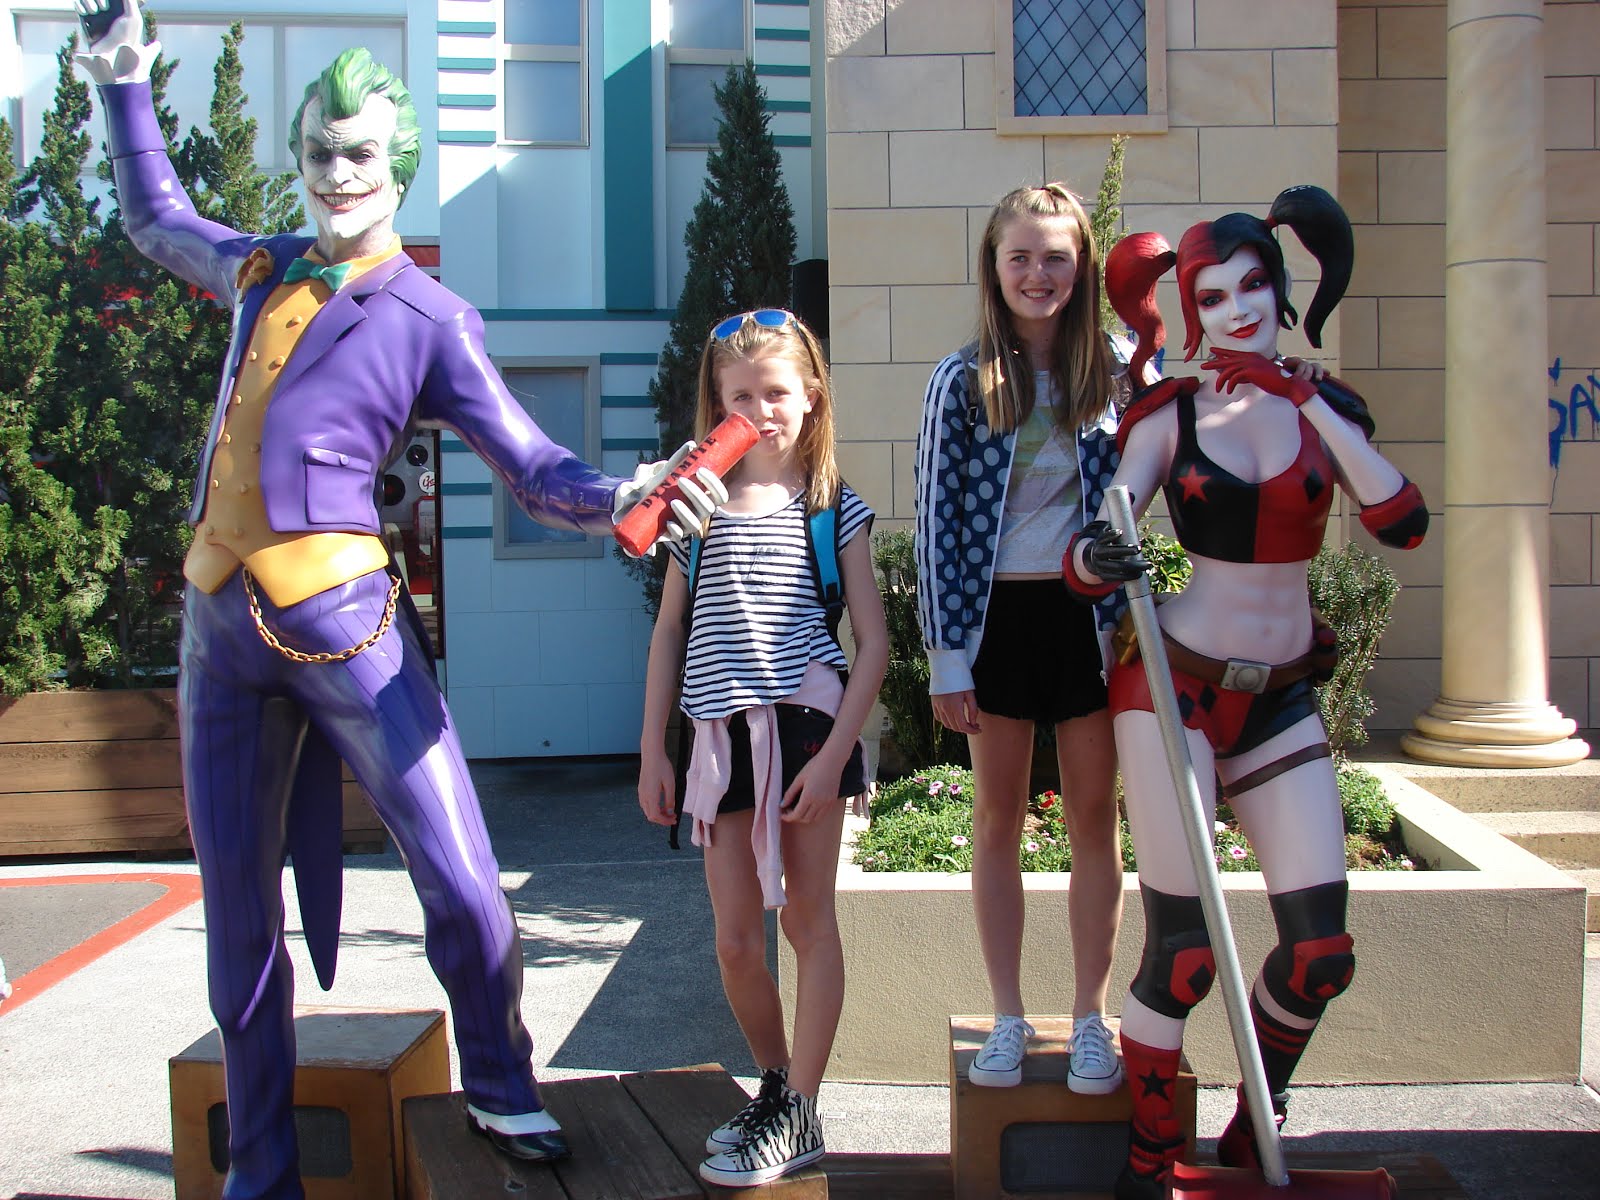 A photo with Harley Quinn and the Joker